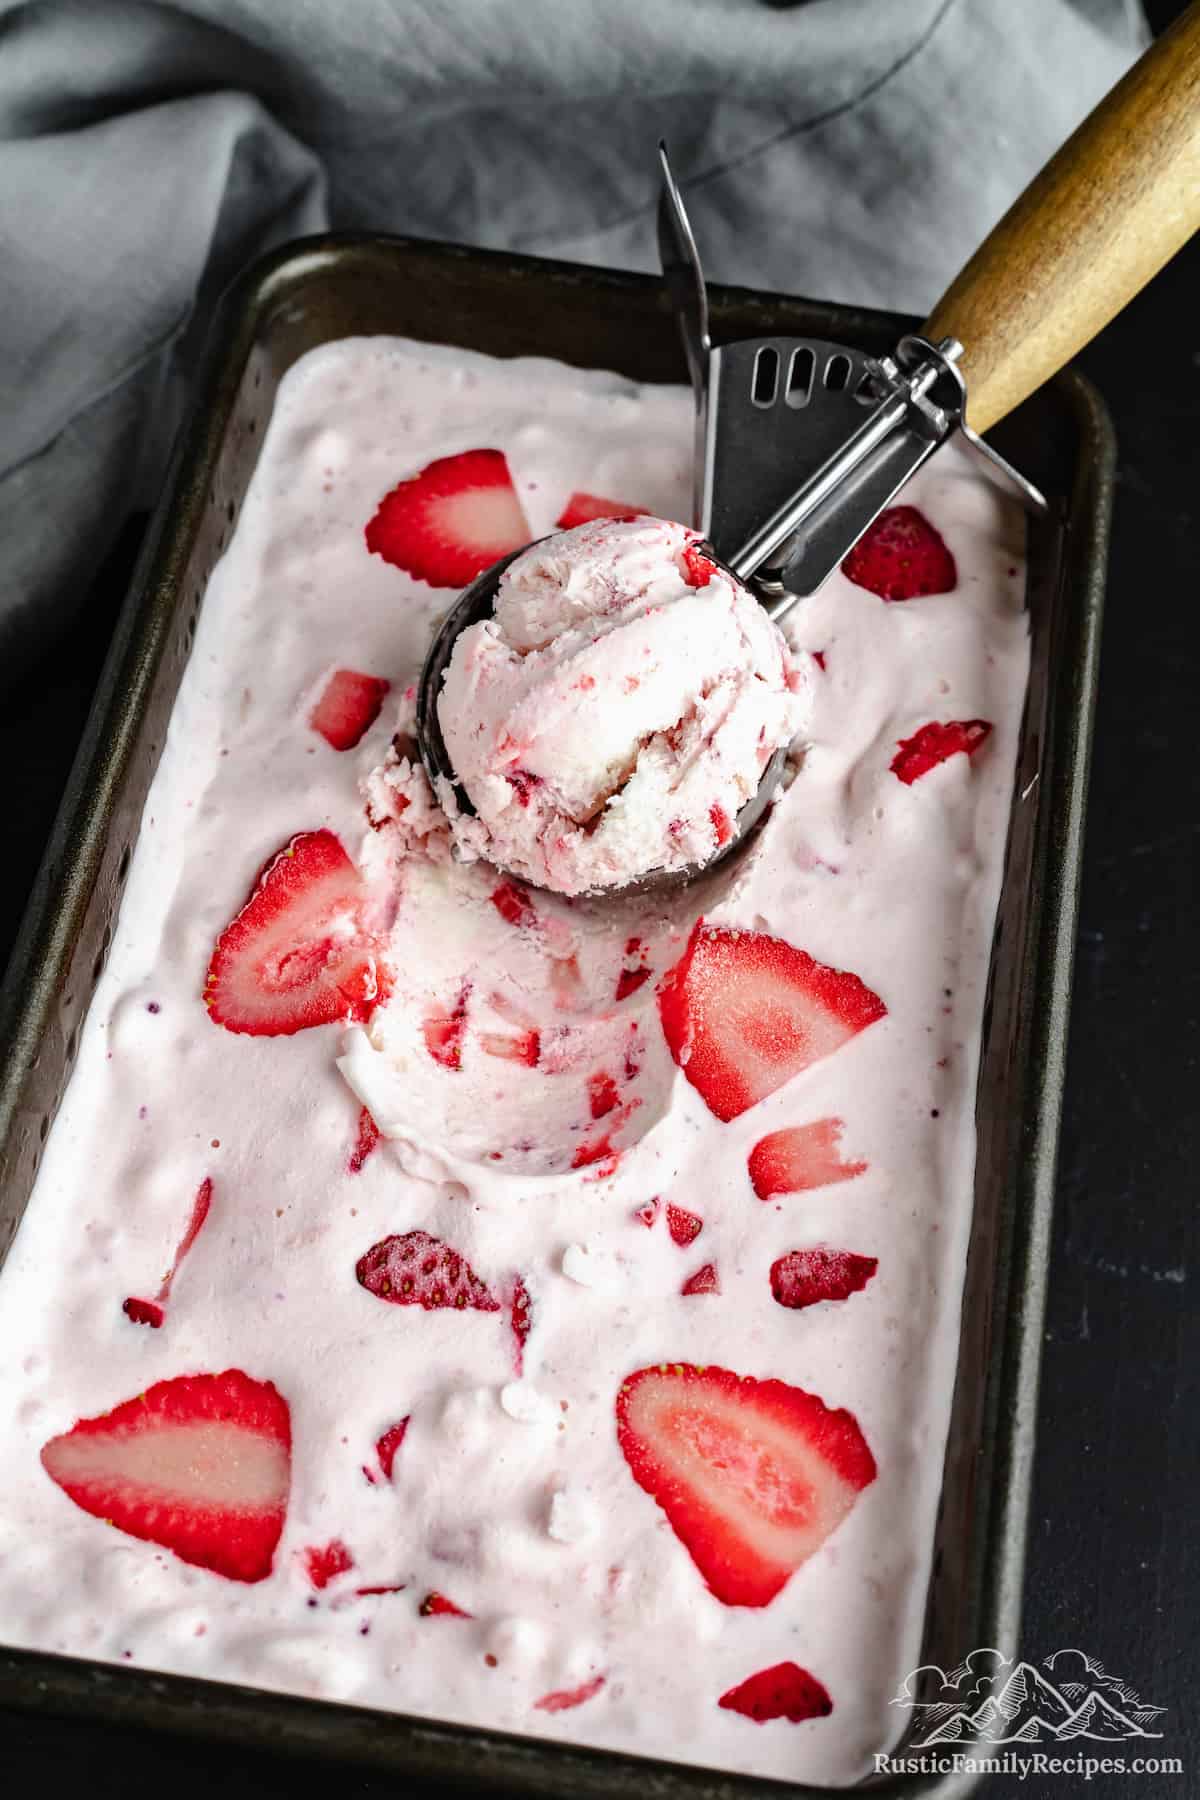 An ice cream scoop picks up a ball of ice cream from a pan full of homemade strawberry ice cream.